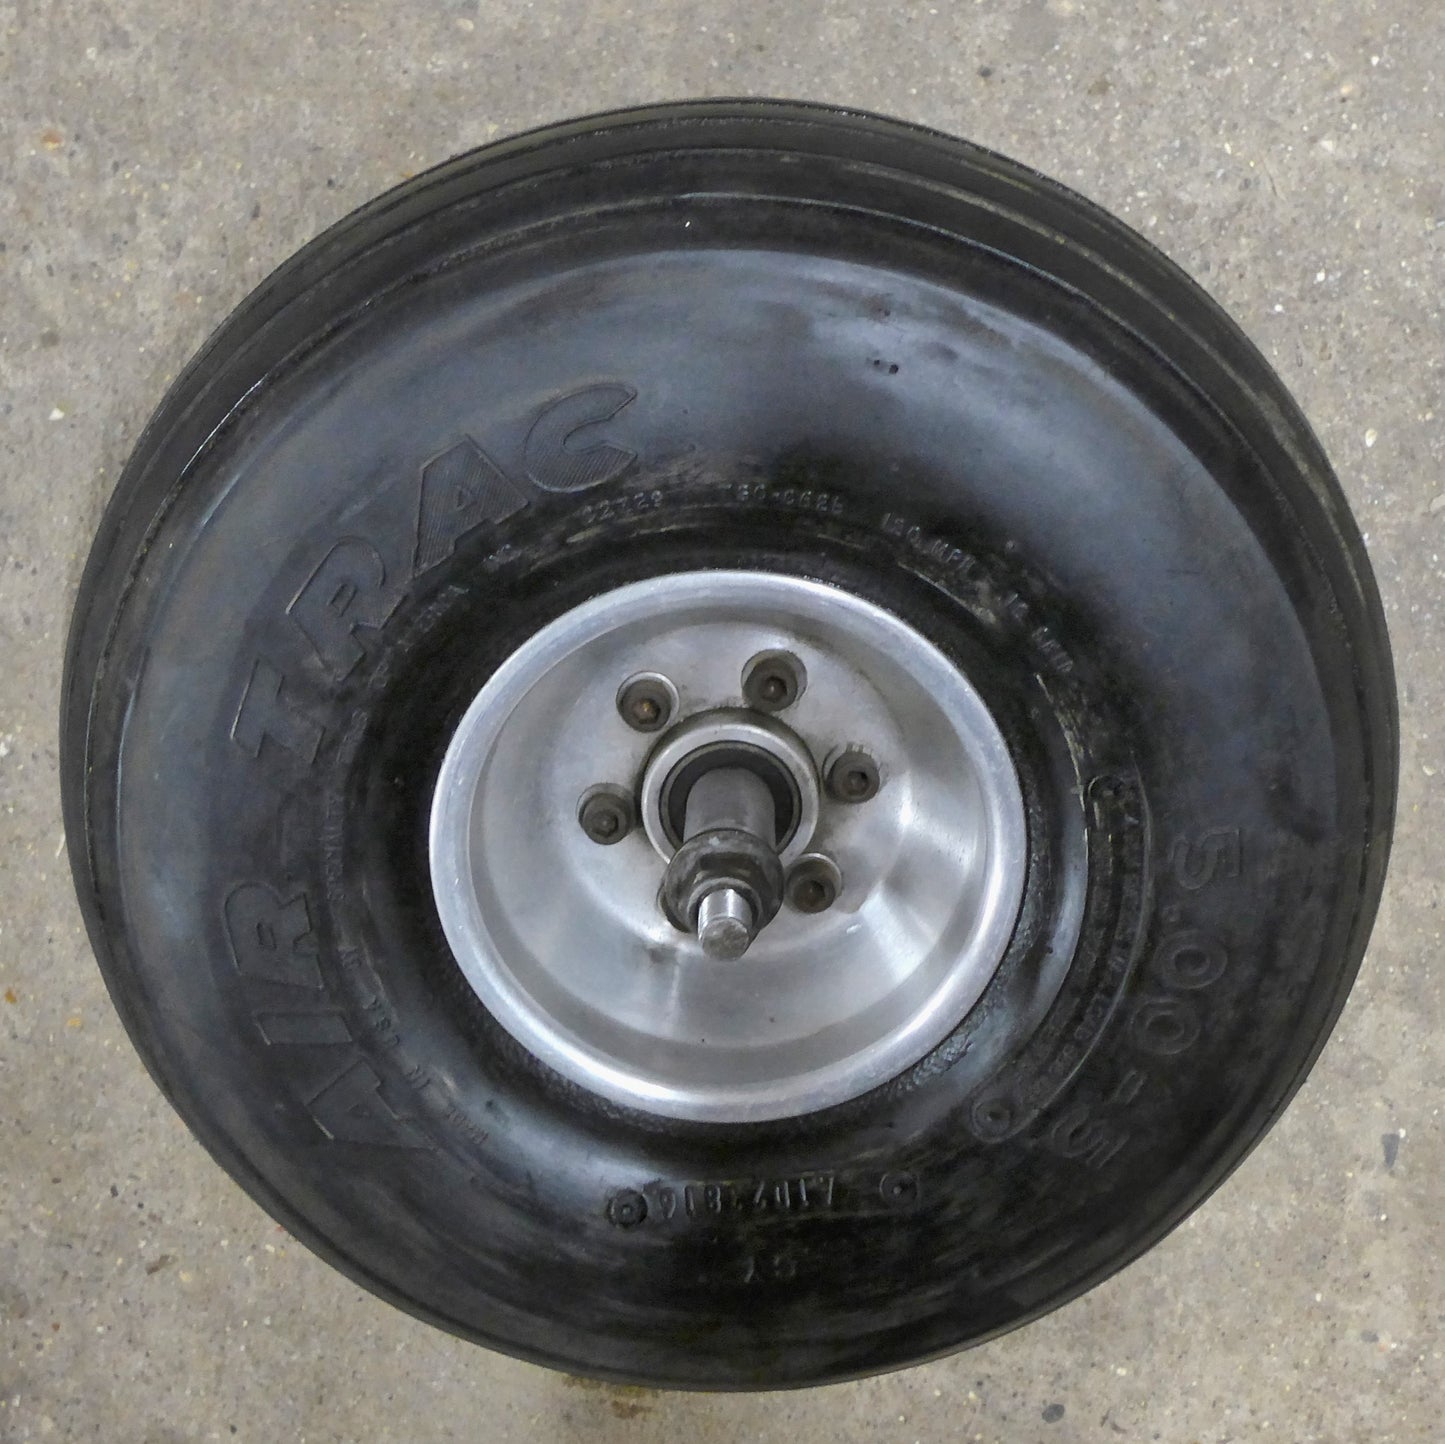 Hegar 5" Nose Wheel, Tyre & Axle Assembly (A/R)